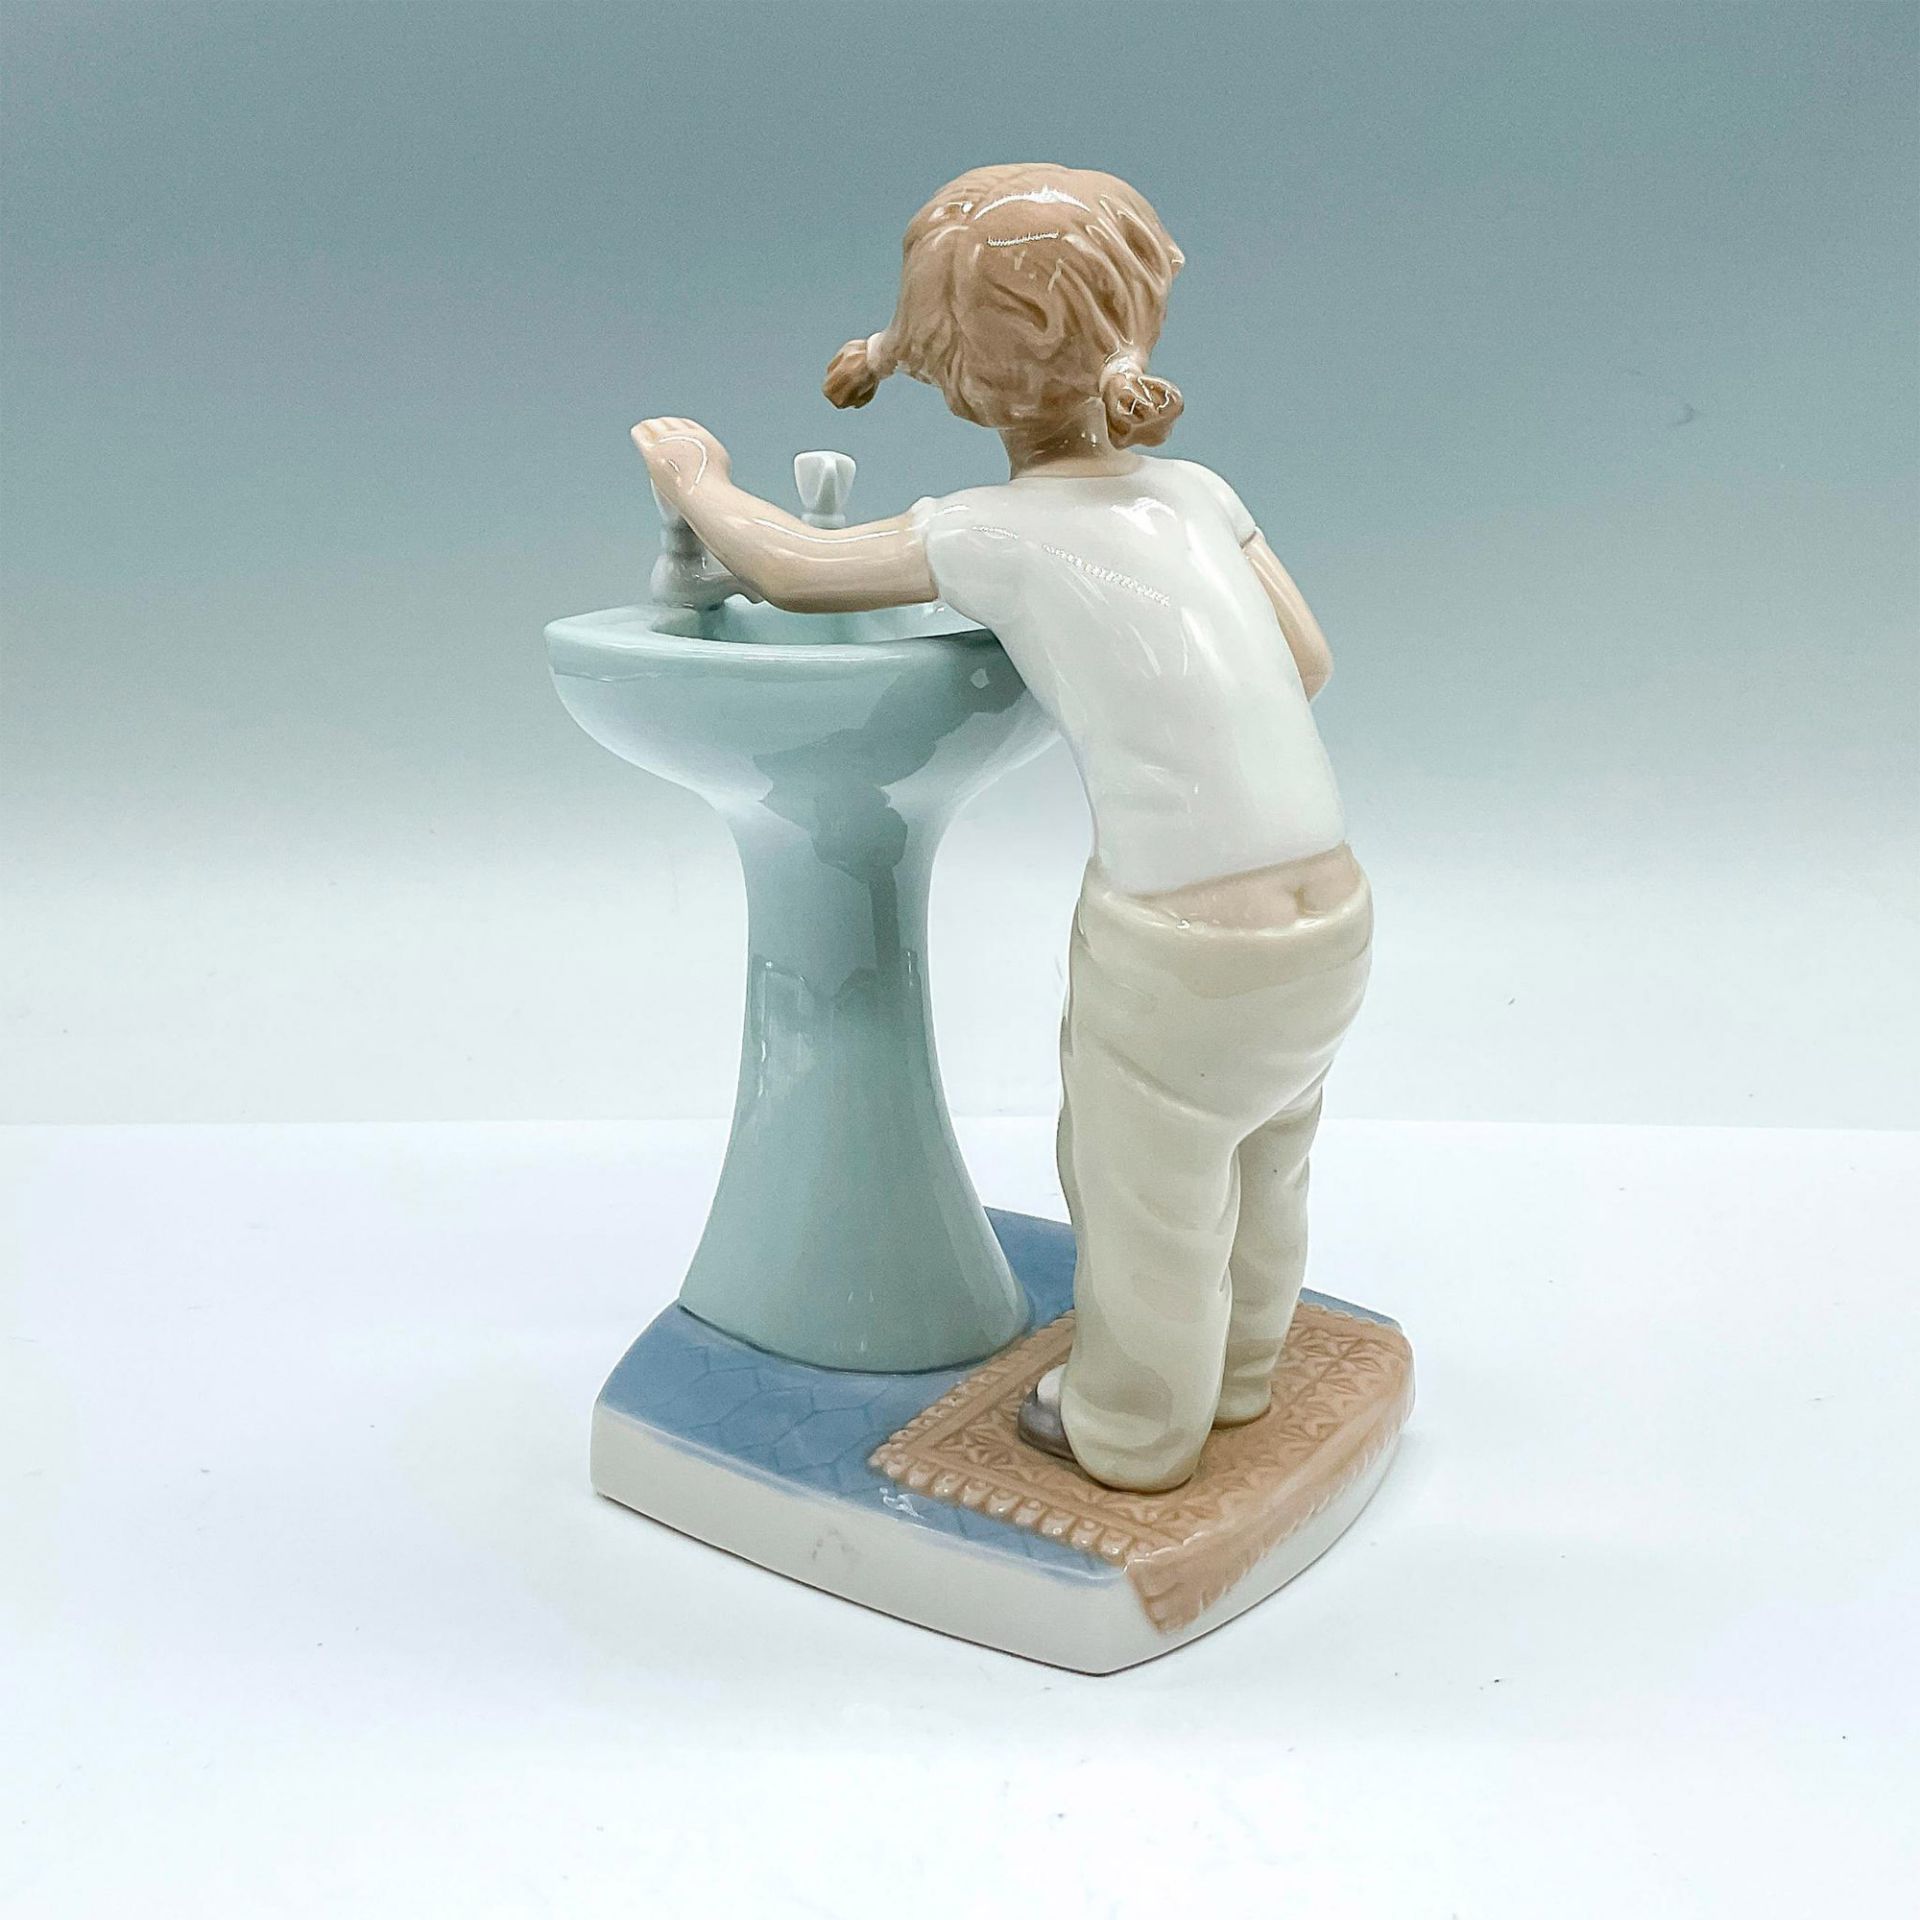 Clean Up Time 1004838 - Lladro Porcelain Figurine - Image 2 of 3